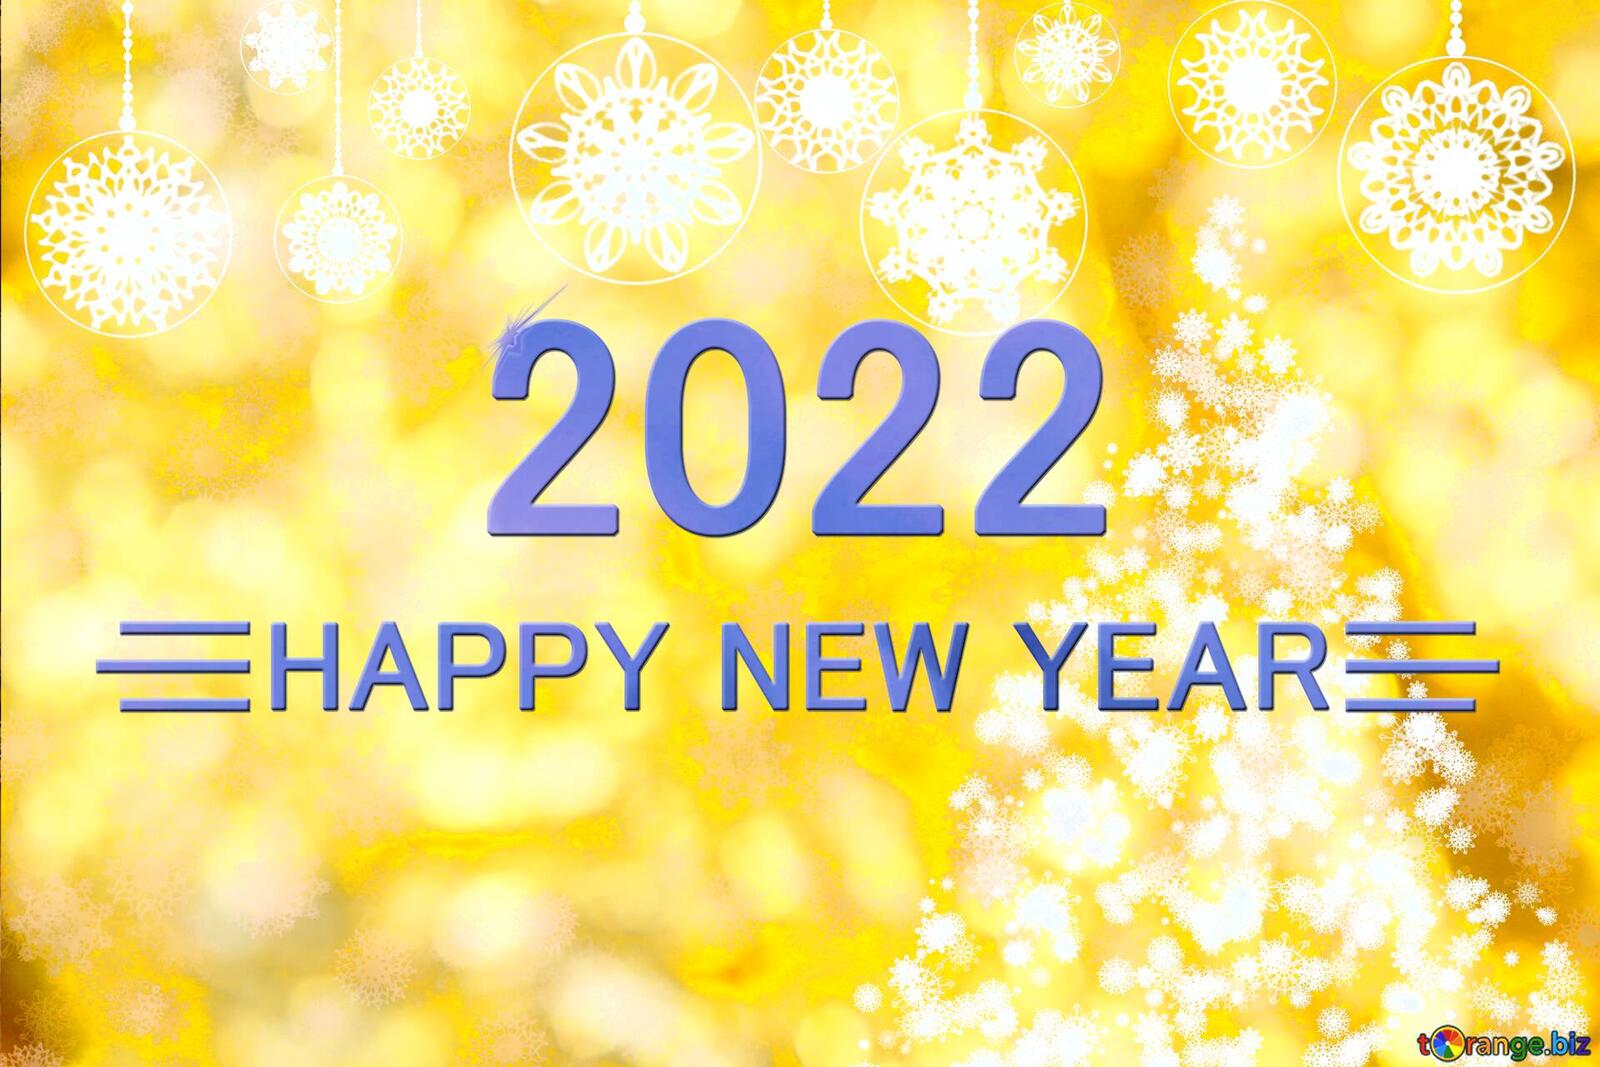 Wallpapers 2022 snowflakes new year on the desktop